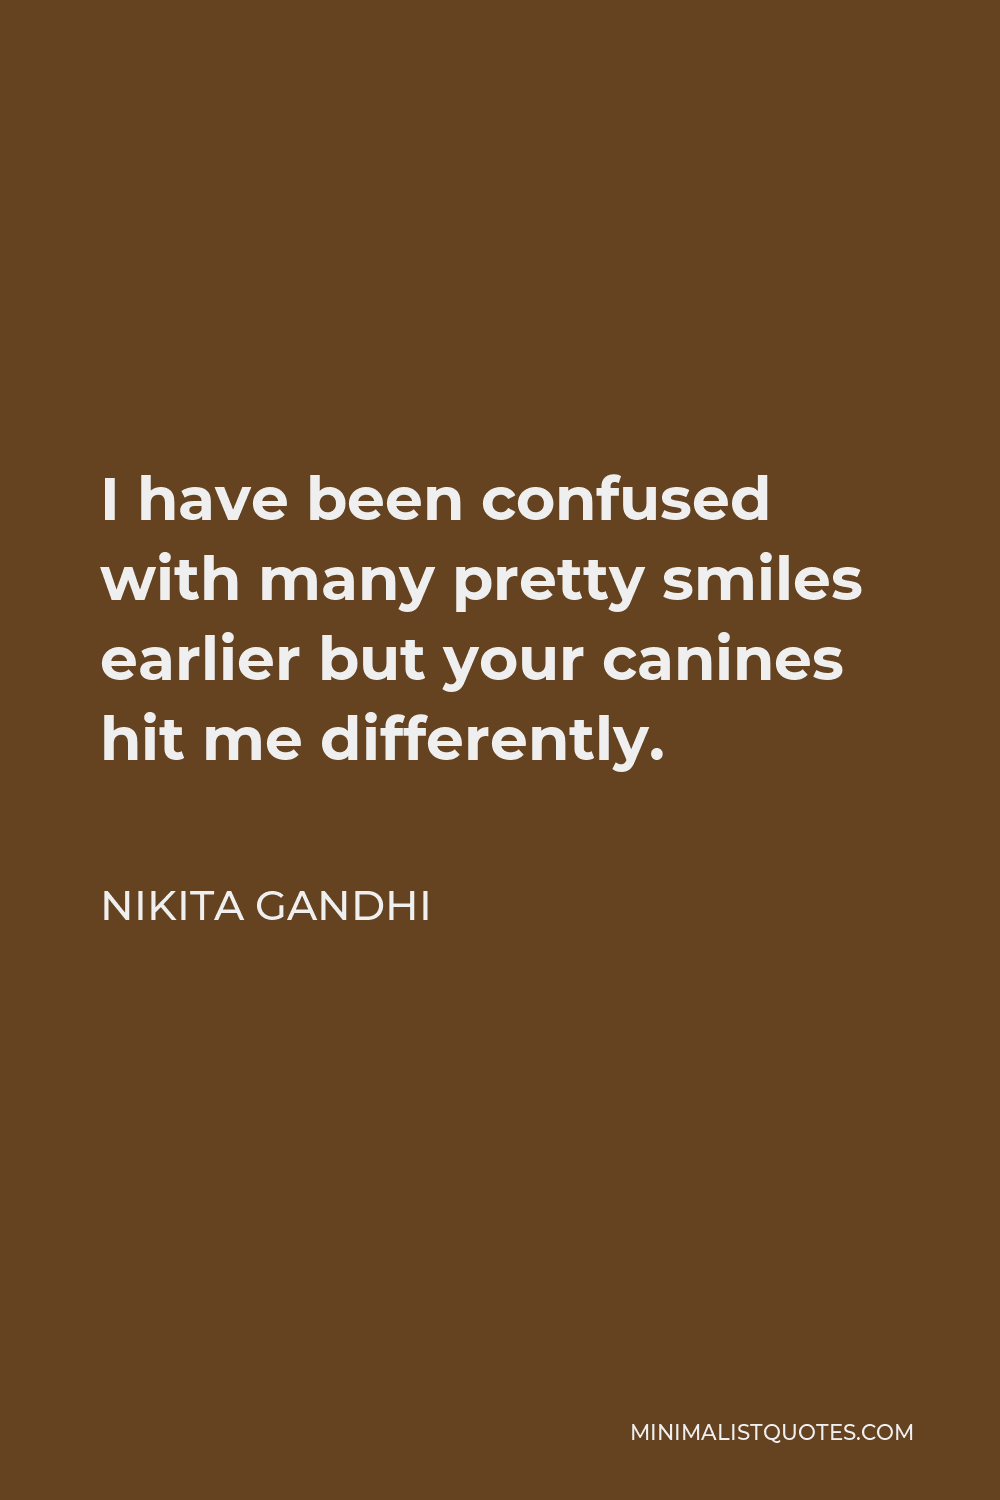 Nikita Gandhi Quote - I have been confused with many pretty smiles earlier but your canines hit me differently.